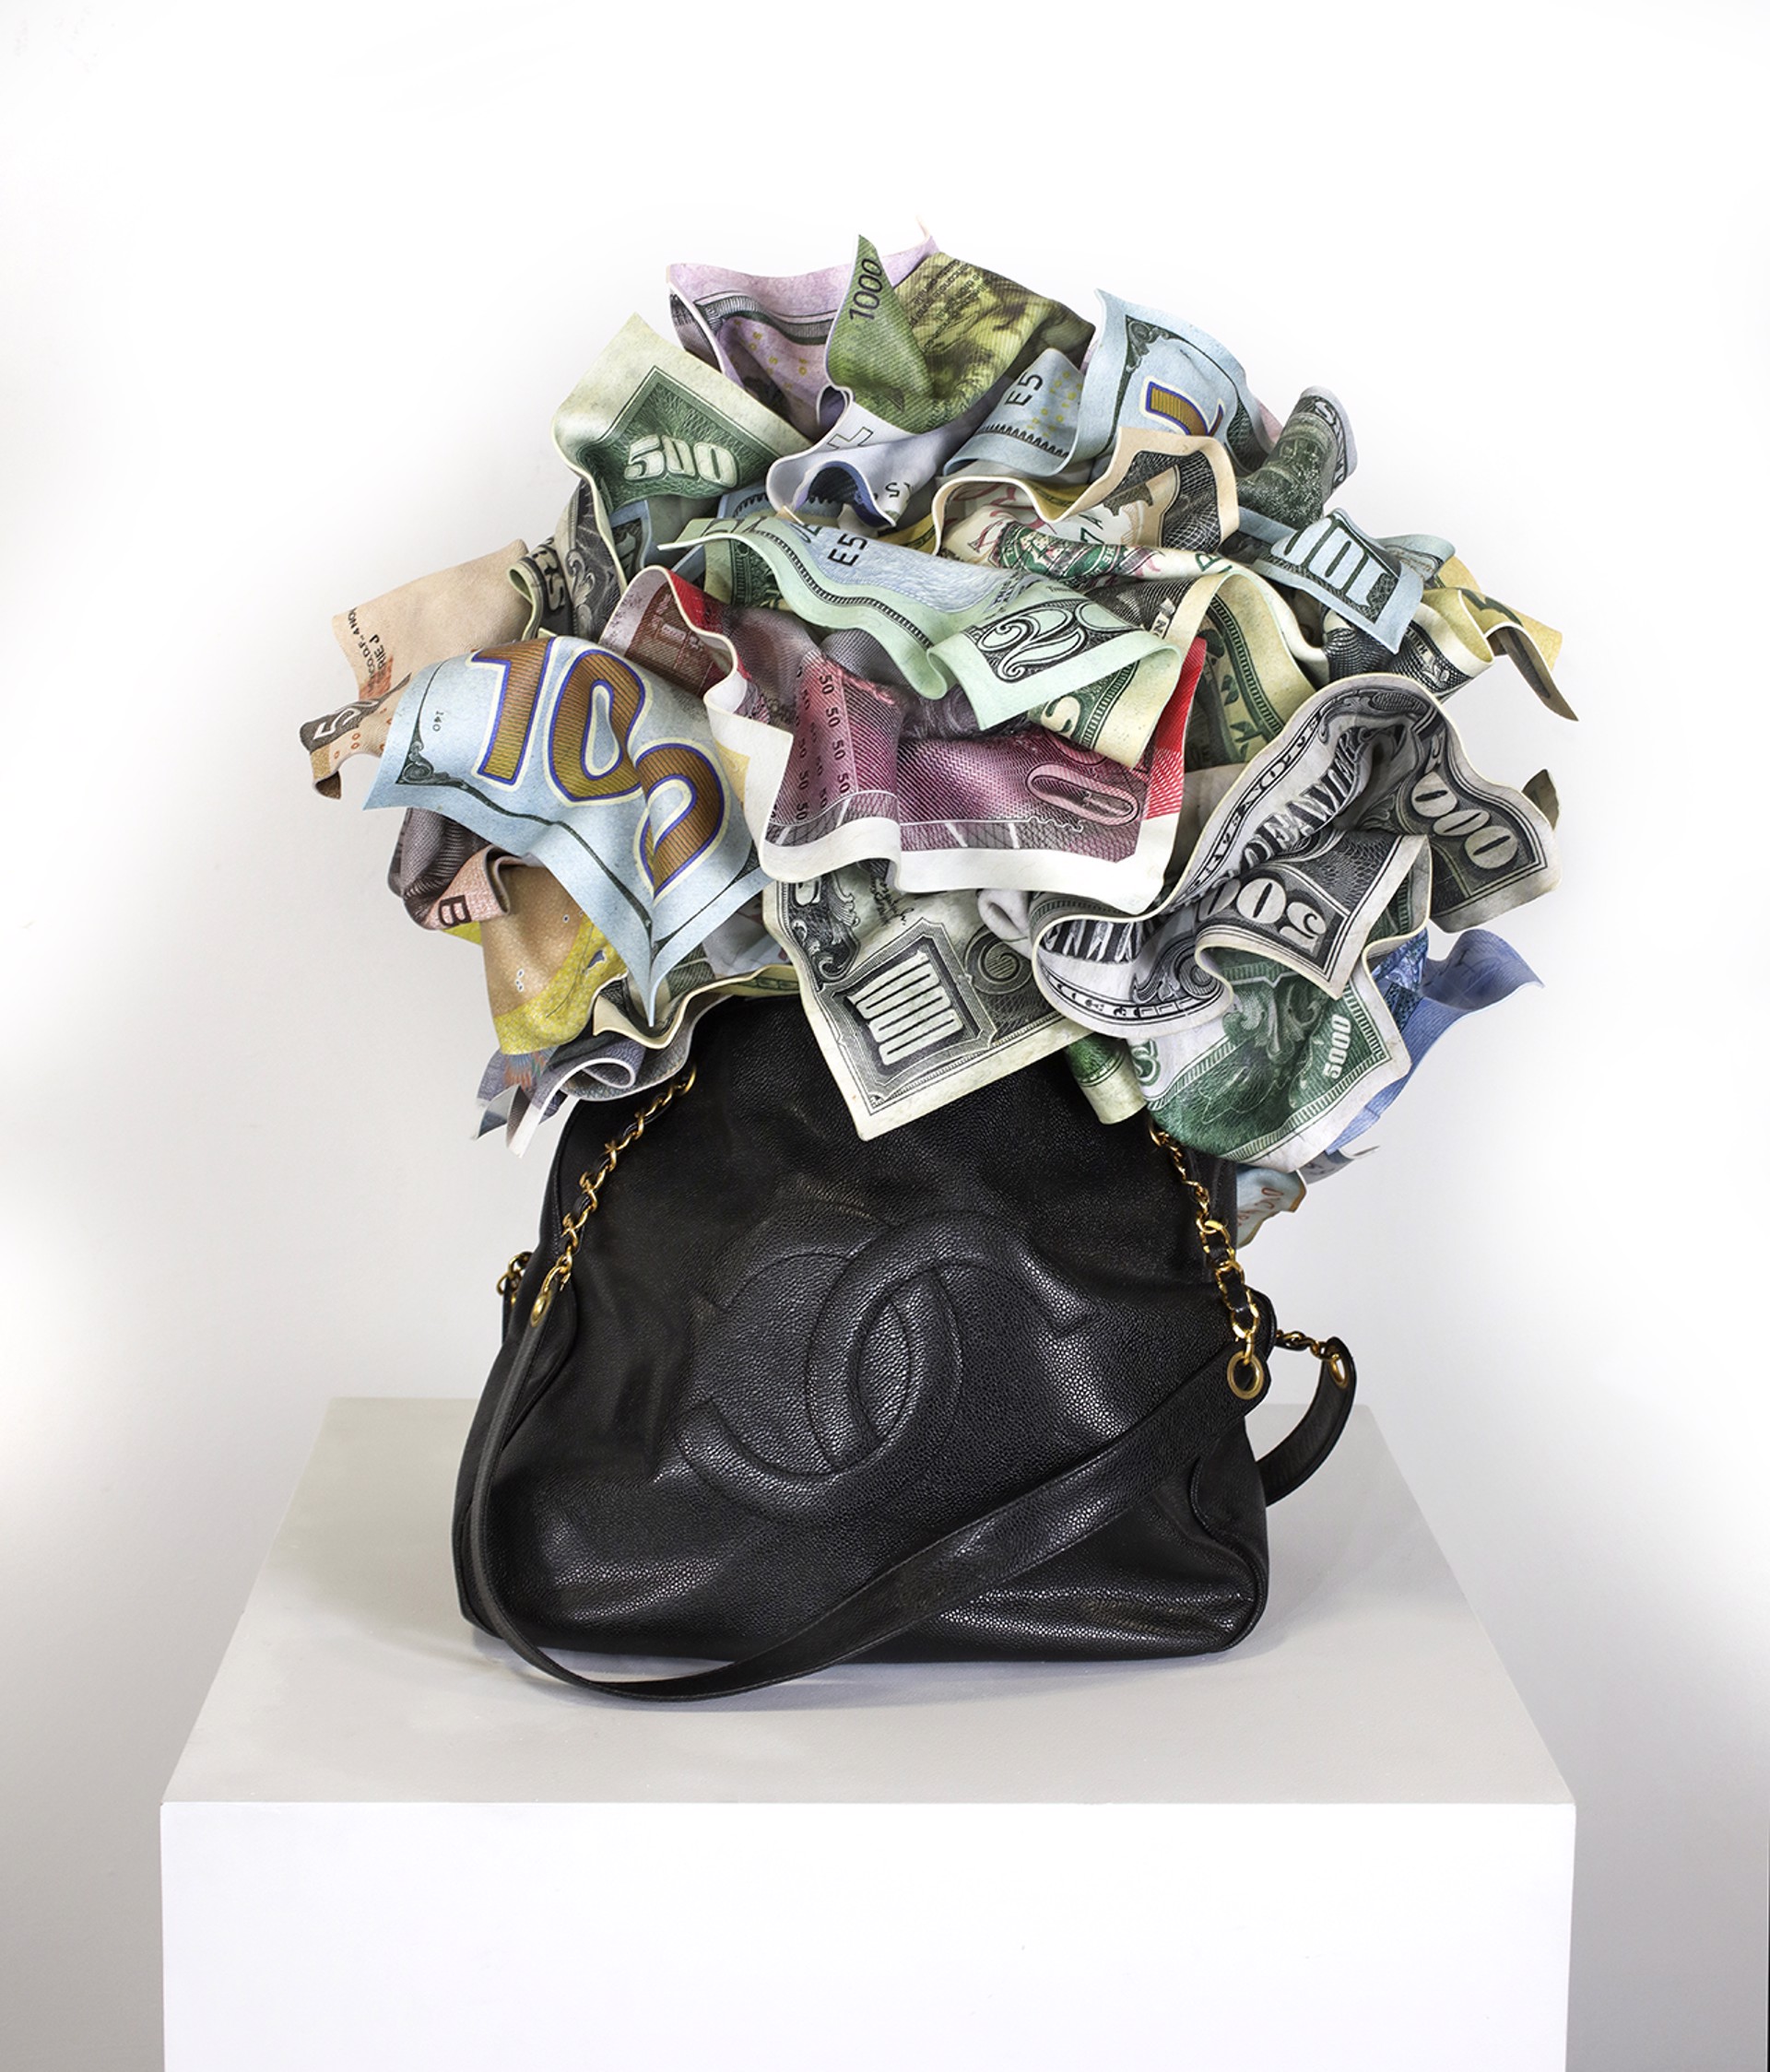 The Big Money Bag by Paul Rousso